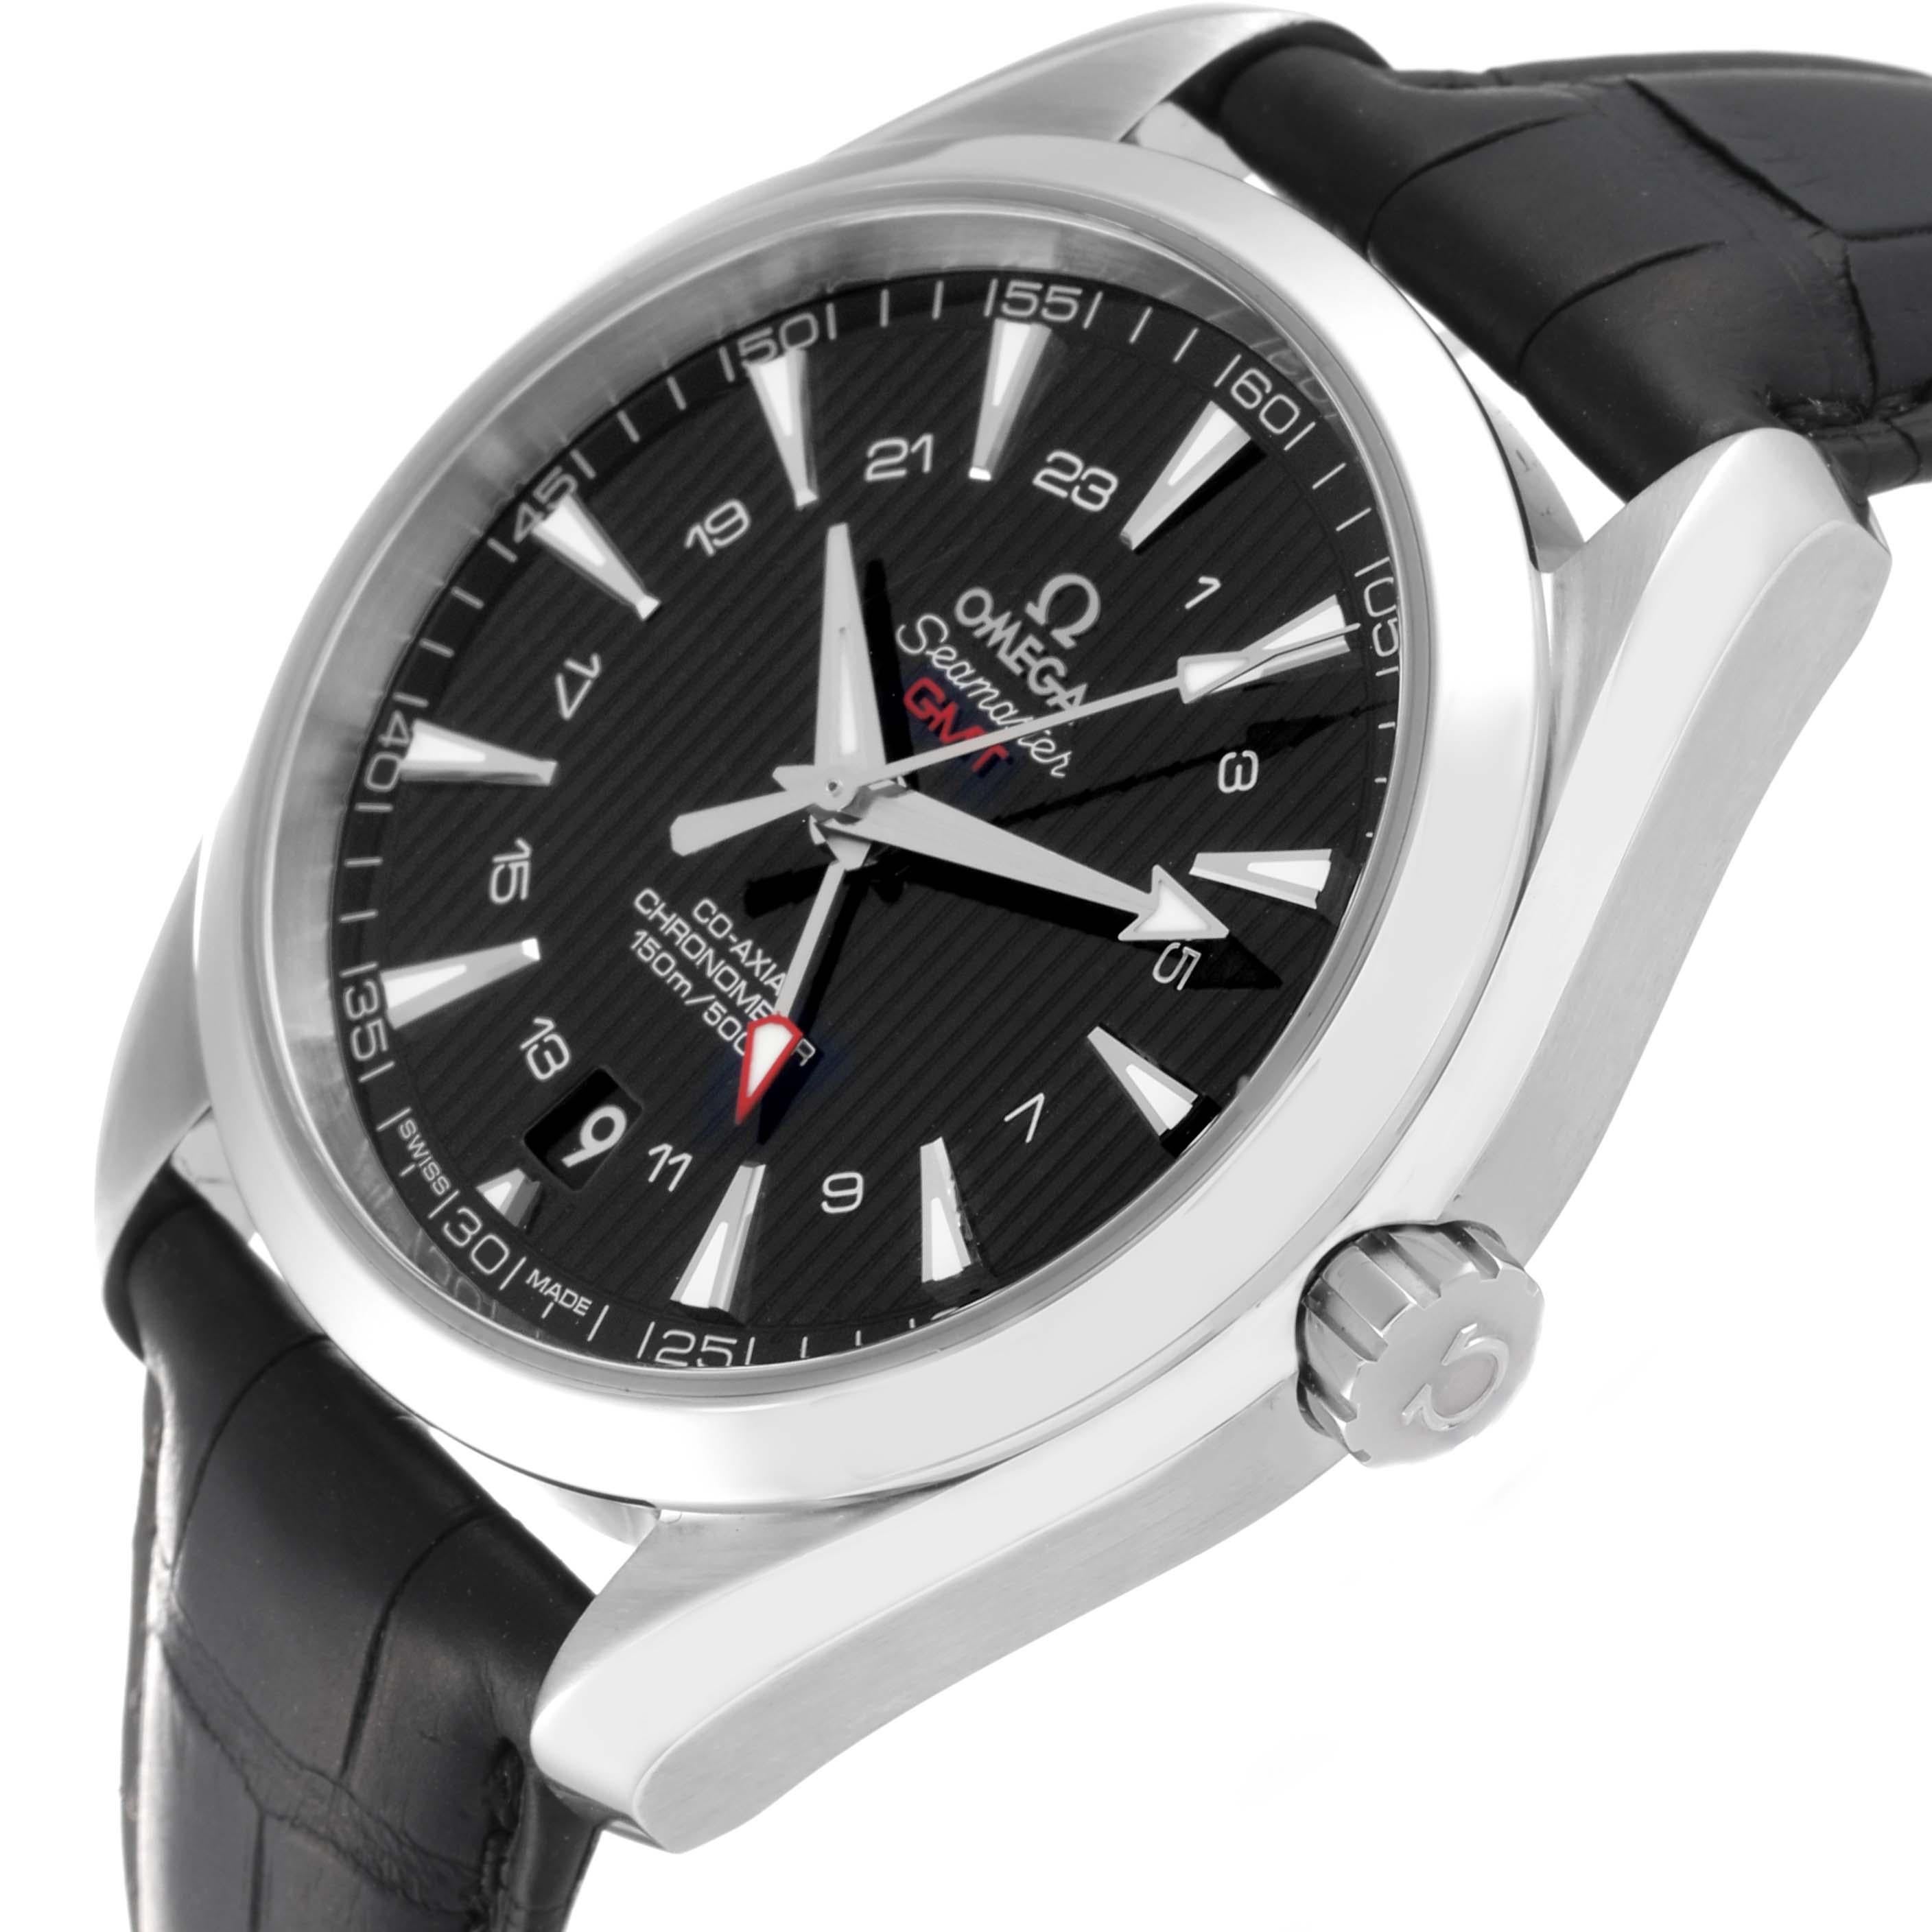 Omega Seamaster Aqua Terra GMT Steel Mens Watch 231.13.43.22.01.001 Box Card. Automatic self-winding movement with Co-Axial Escapement for greater precision. GMT with time zone function. Silicon balance-spring on free sprung-balance, 2 barrels